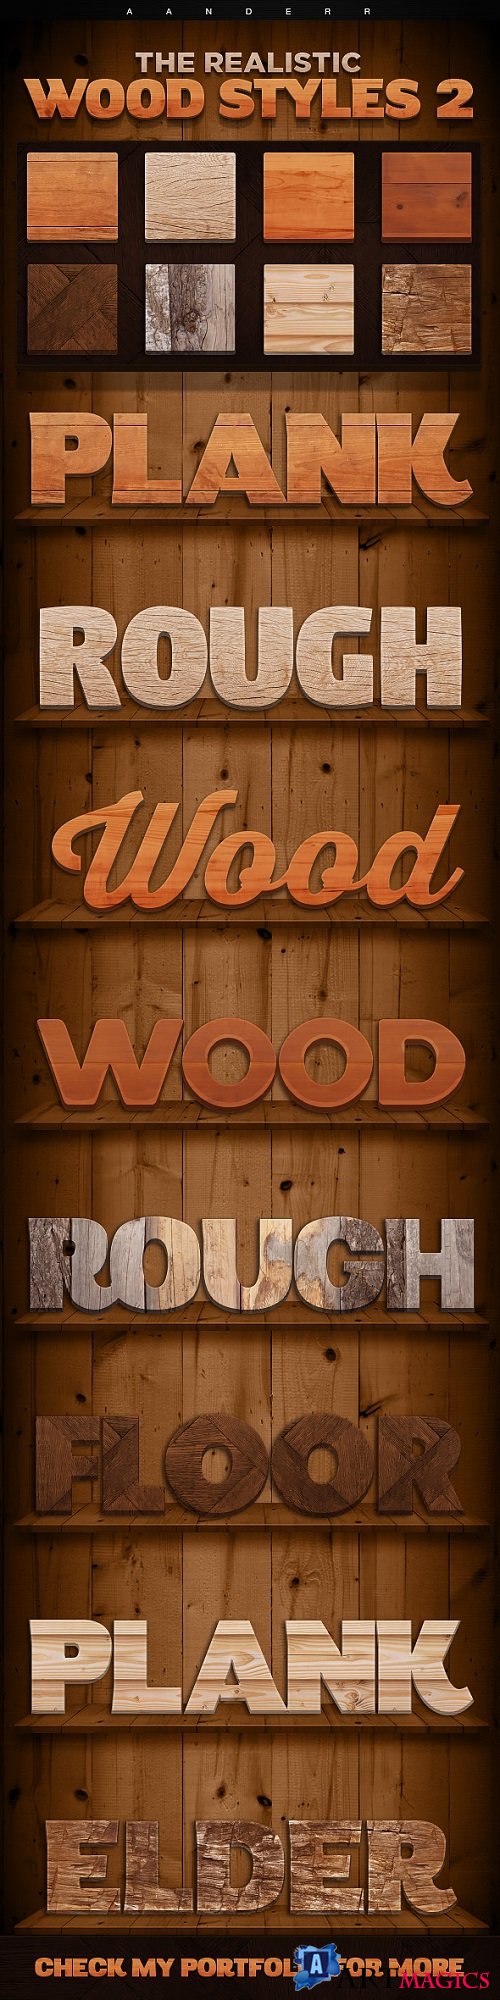 The Realistic Wood Styles 2 - 18006000